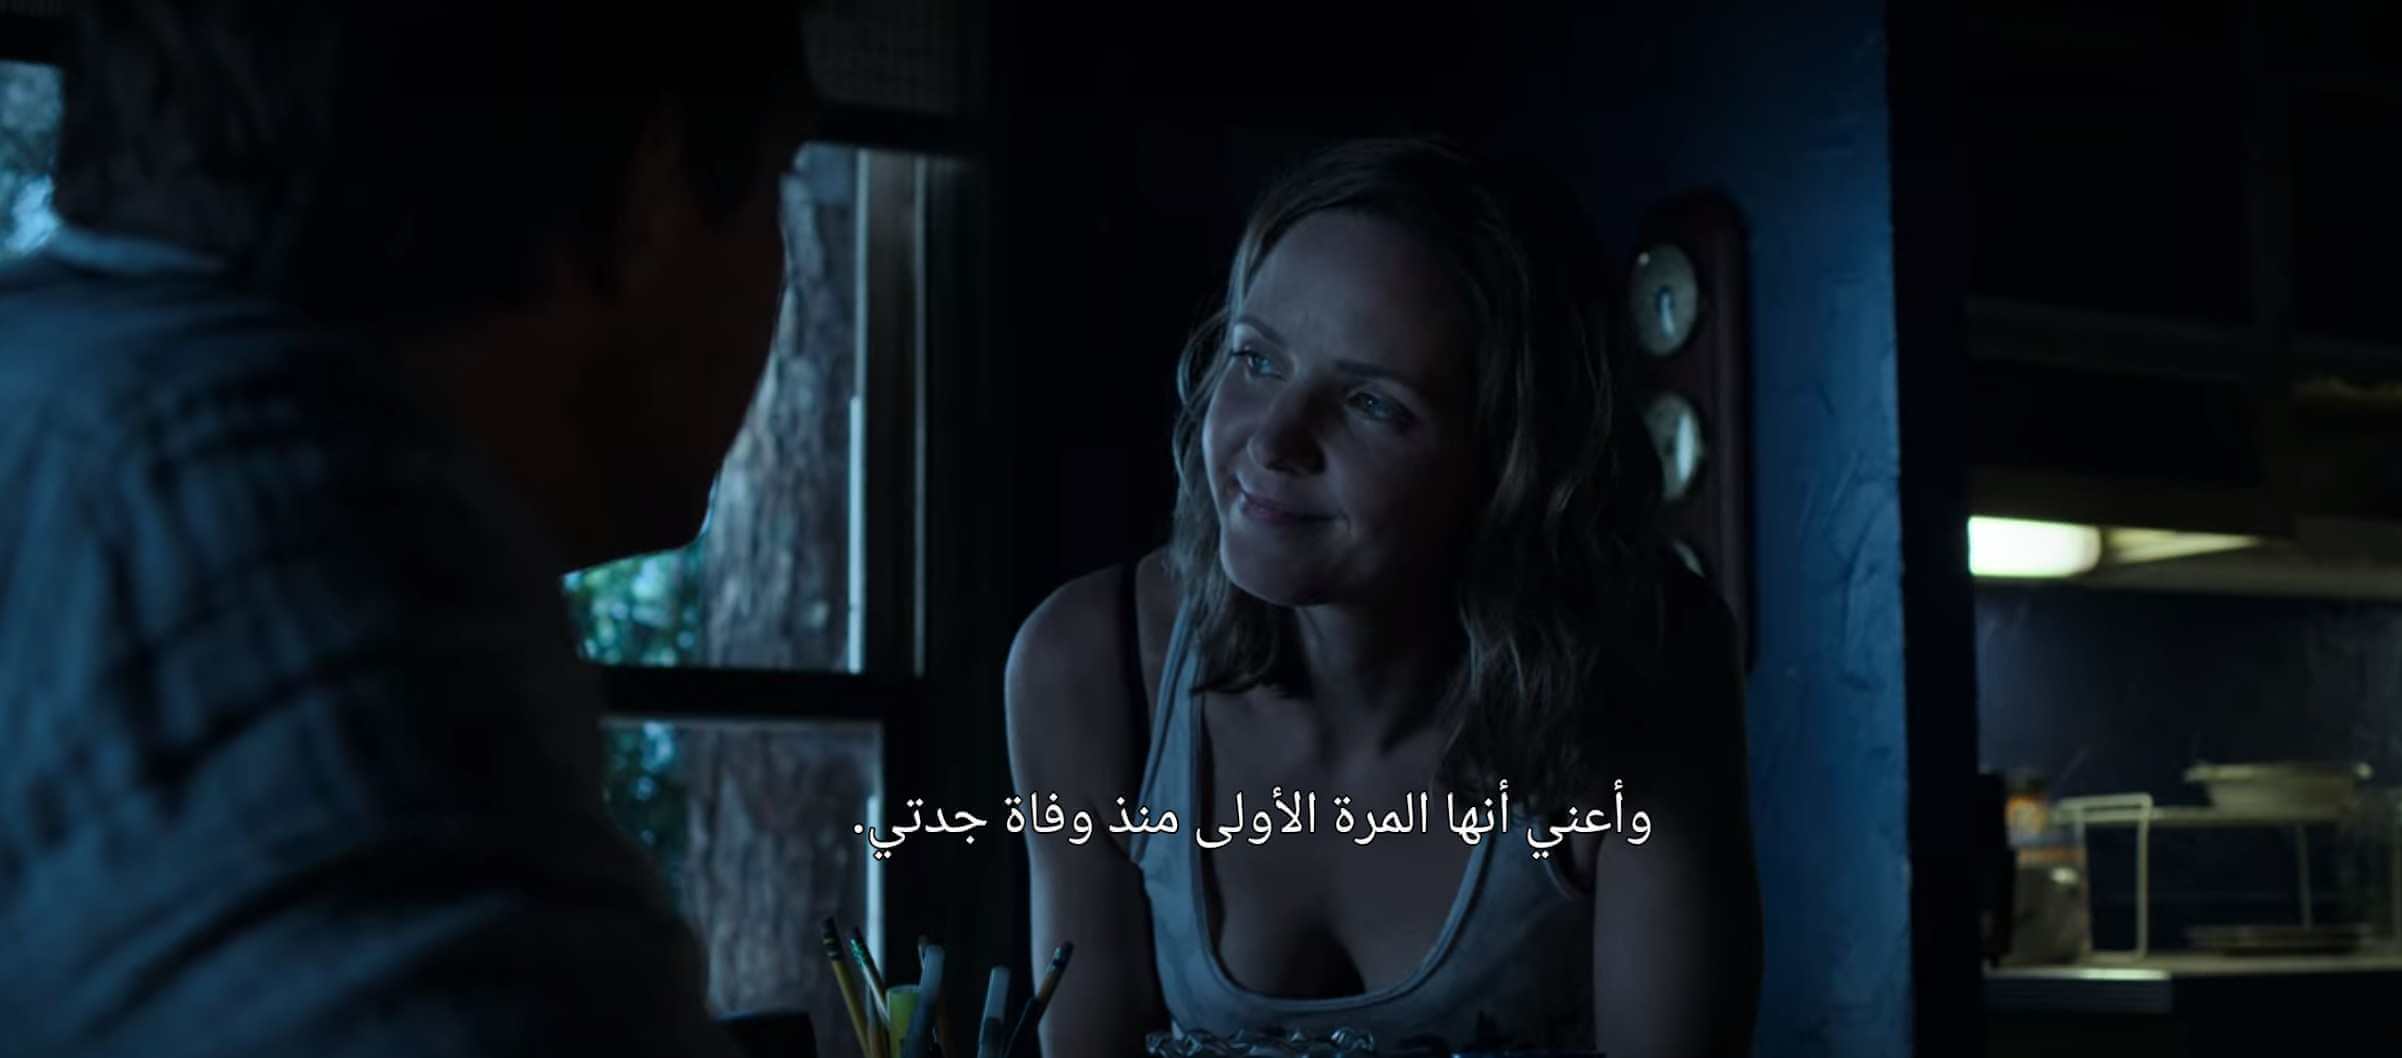 How To Add Arabic Subtitles On Netflix The Ultimate Guide Arabic For Nerds